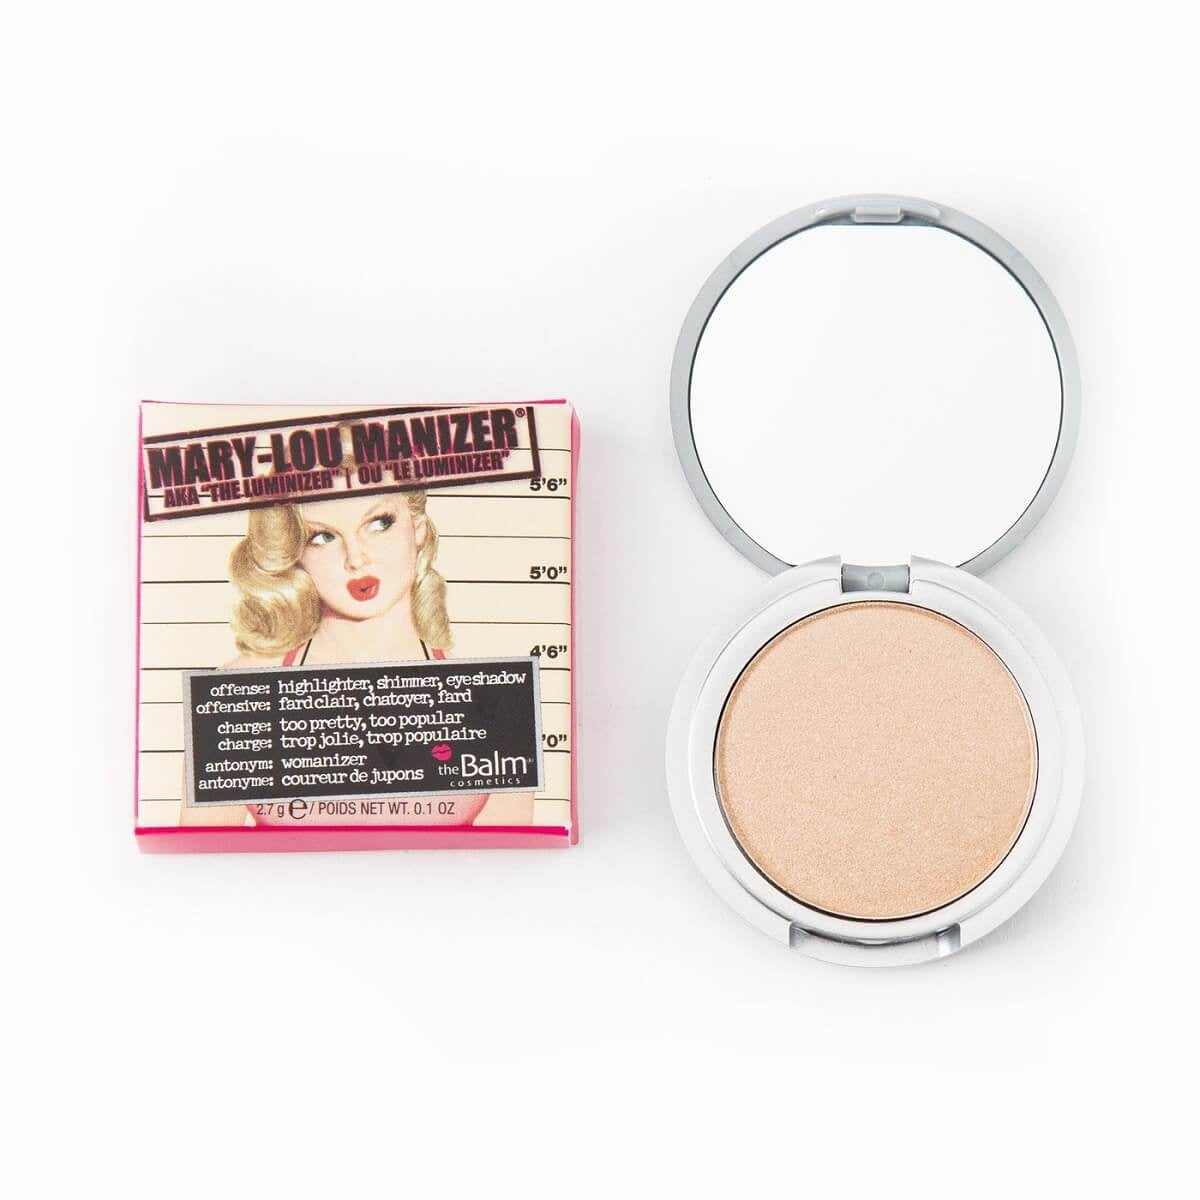 TheBalm (Official) Mary Lou Travel Mini Size